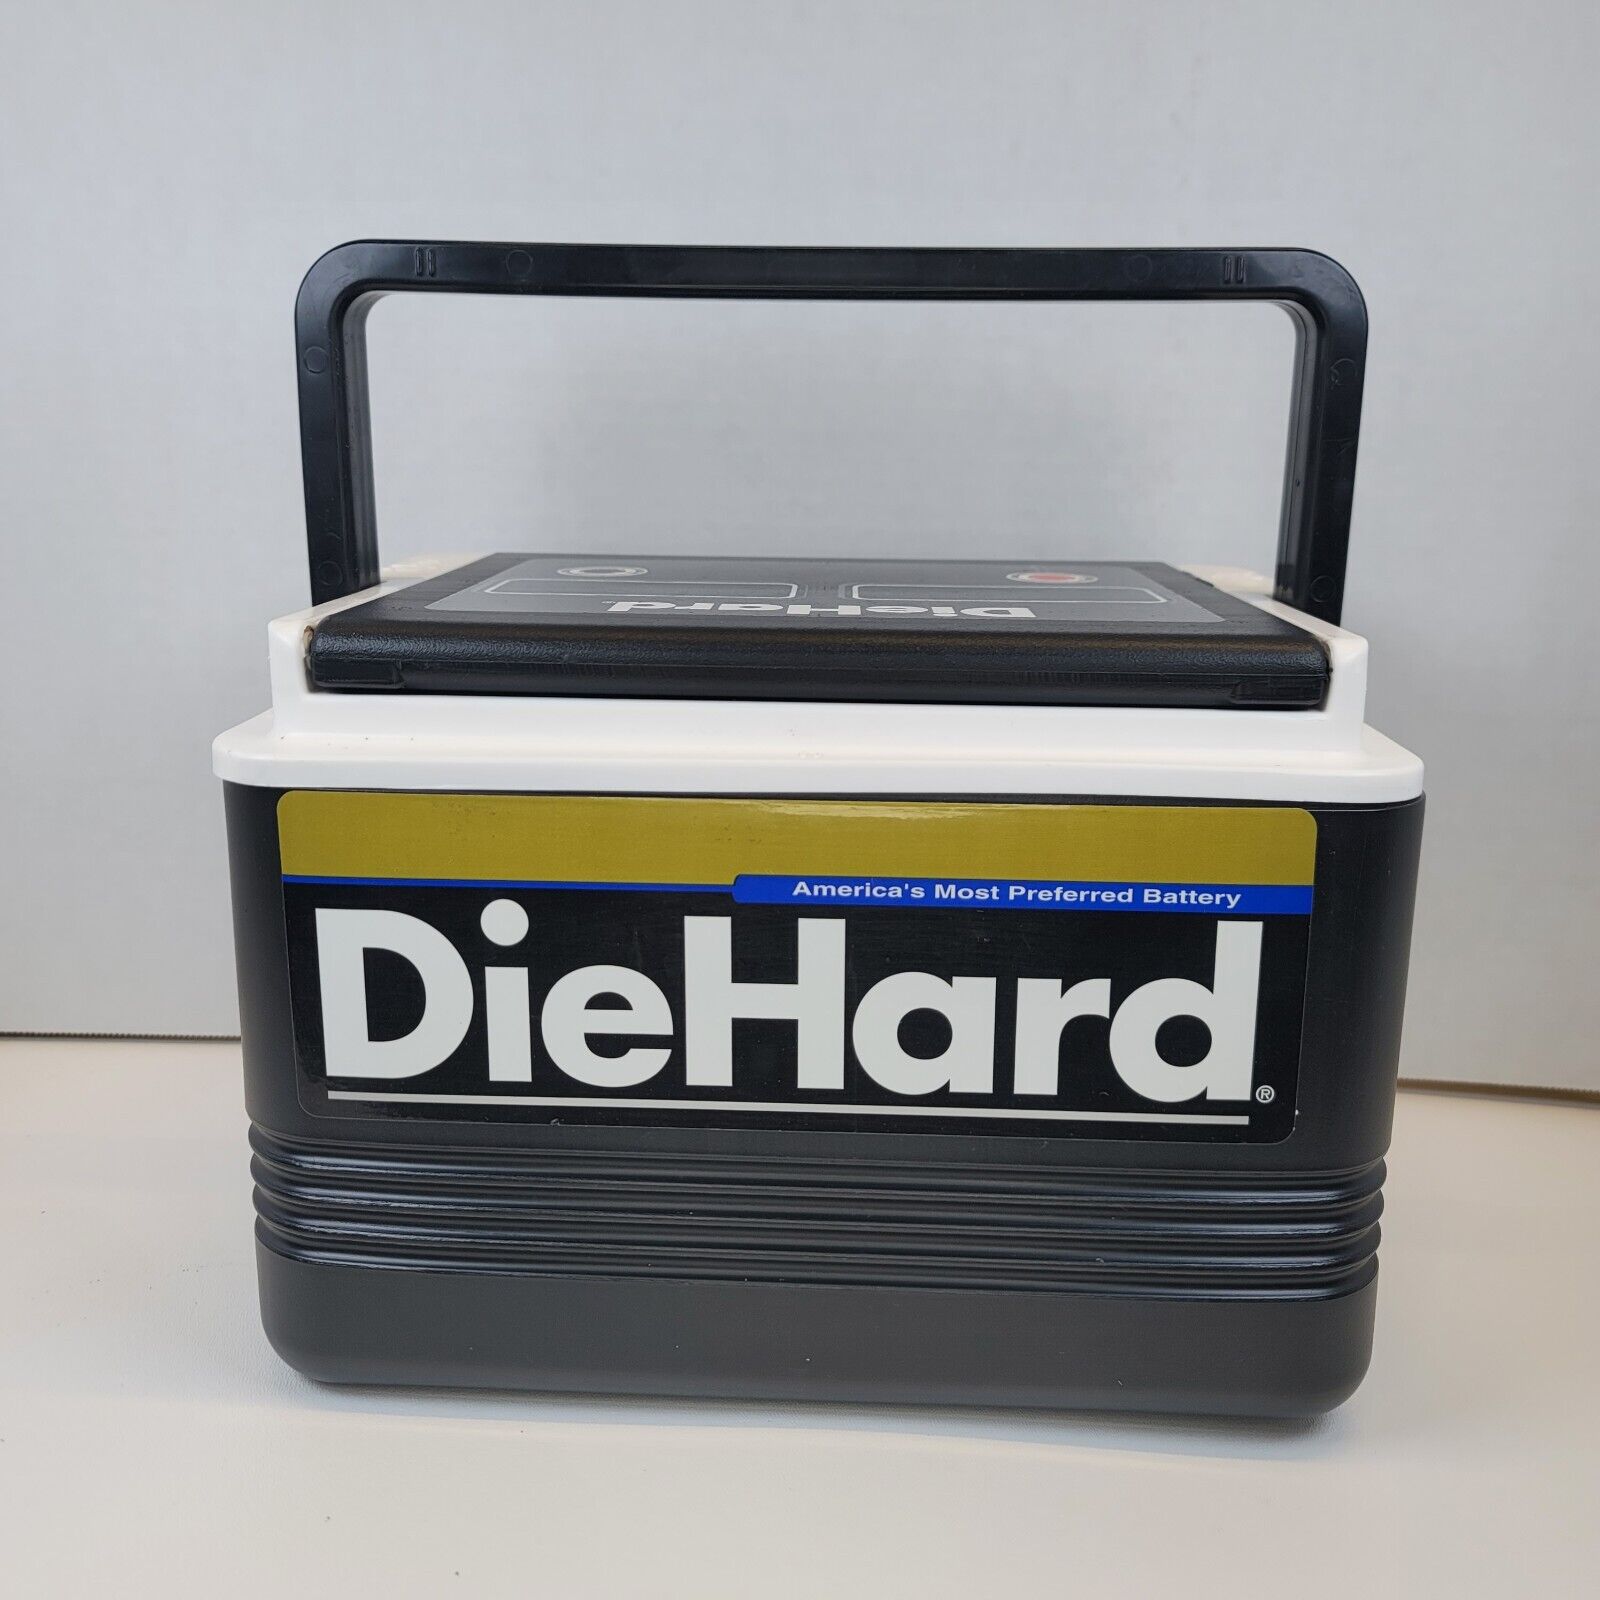 Igloo Die Hard Battery Cooler Black and White 6 Pack Lunch Box 11 x 7 x 8 inches